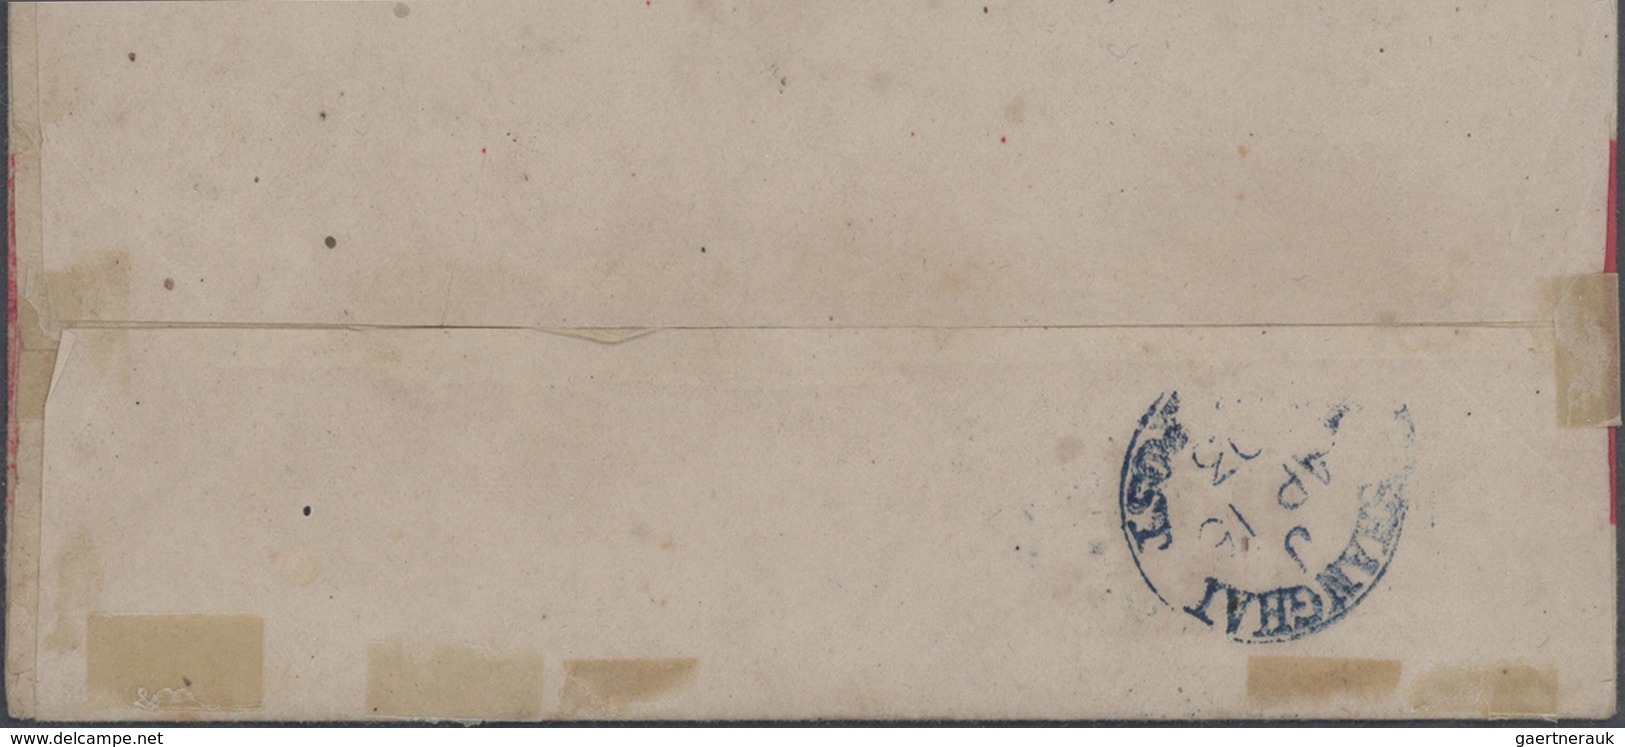 **/*/(*)/O/Br/GA China - Shanghai: 1865/97, the interesting detail study on a great array of subjects: small dragons